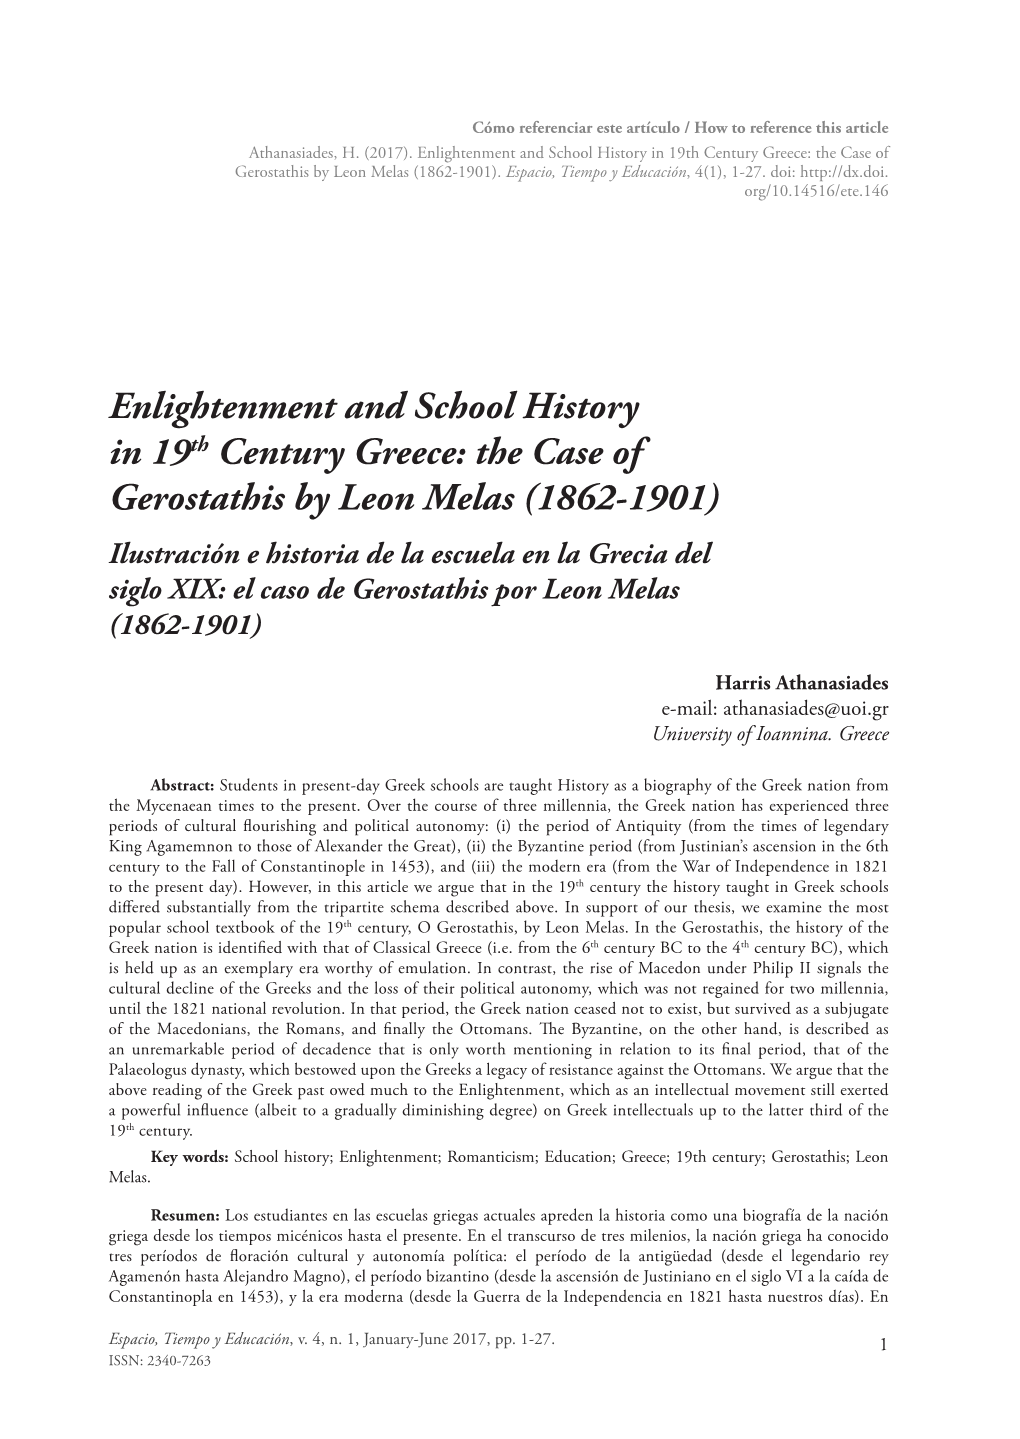 Enlightenment and School History in 19Th Century Greece: the Case of Gerostathis by Leon Melas (1862-1901)